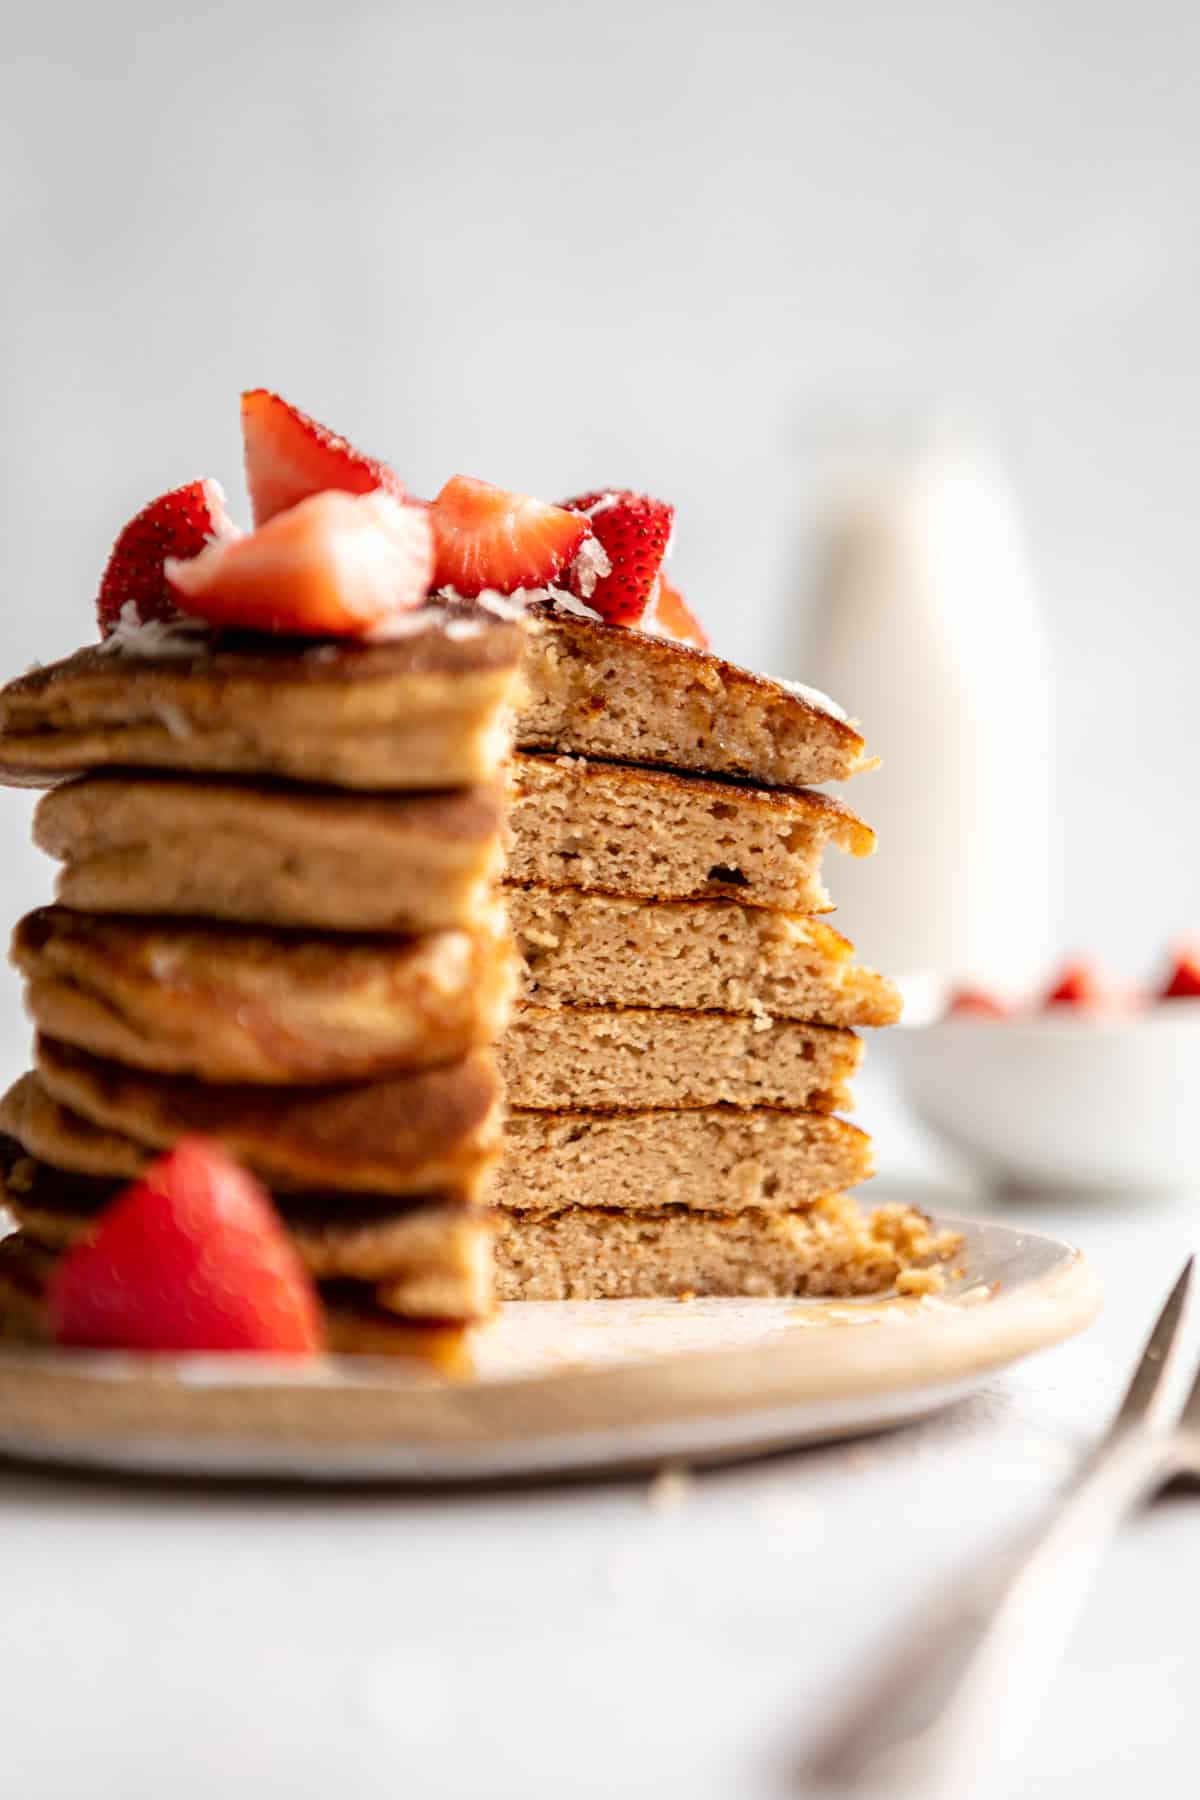 coconut flour pancakes with strawberries and maple syrup on a plate